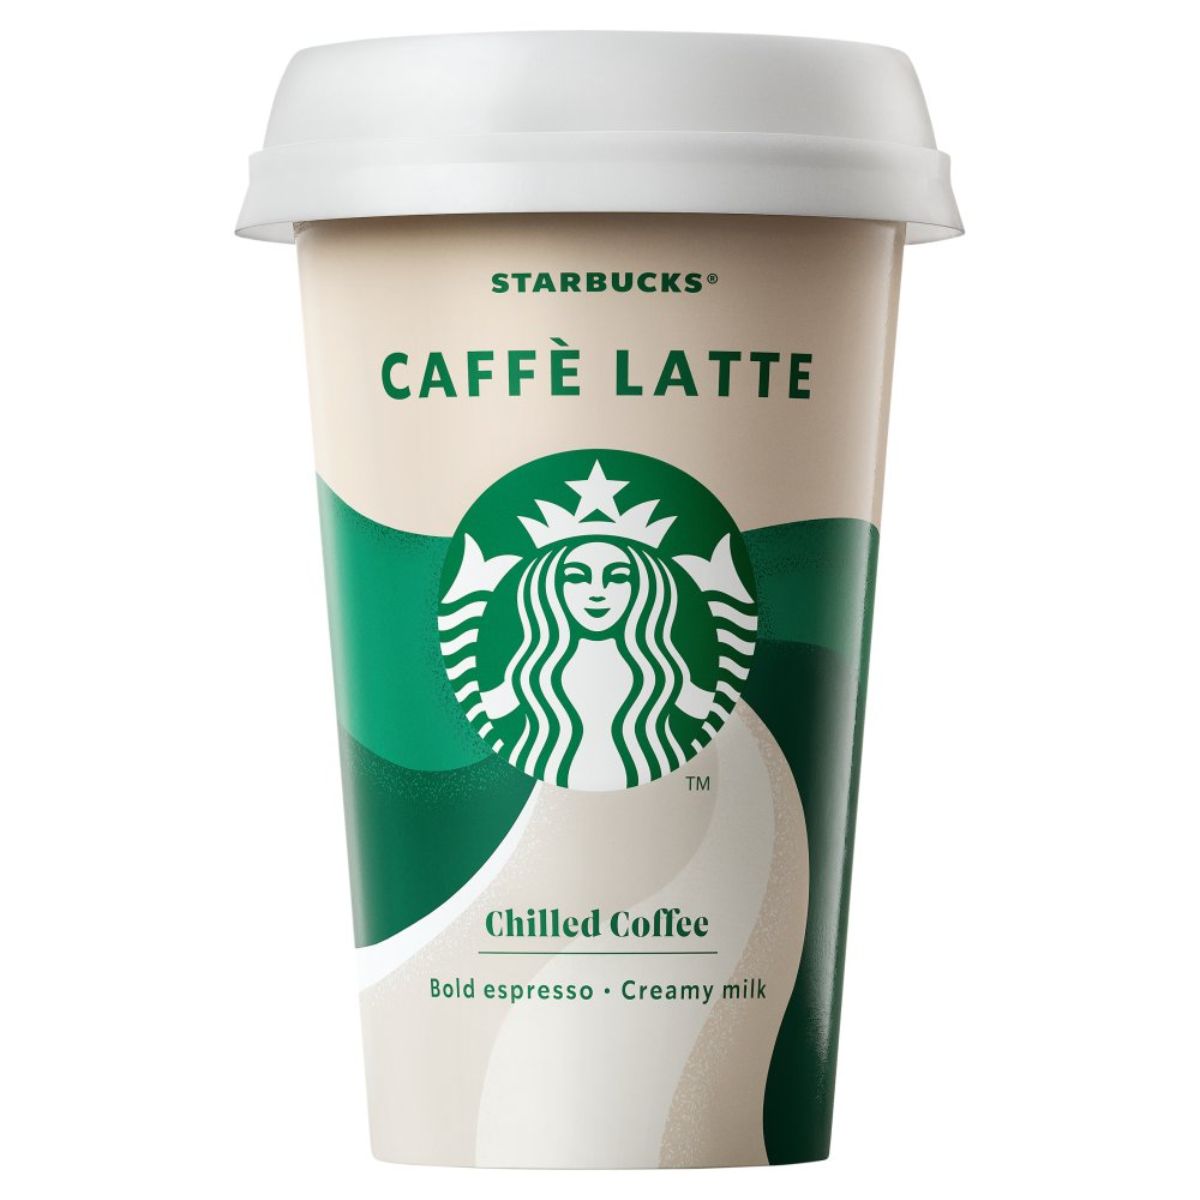 Starbucks - Caffe Latte Chilled coffee - 220ml chilled coffee.